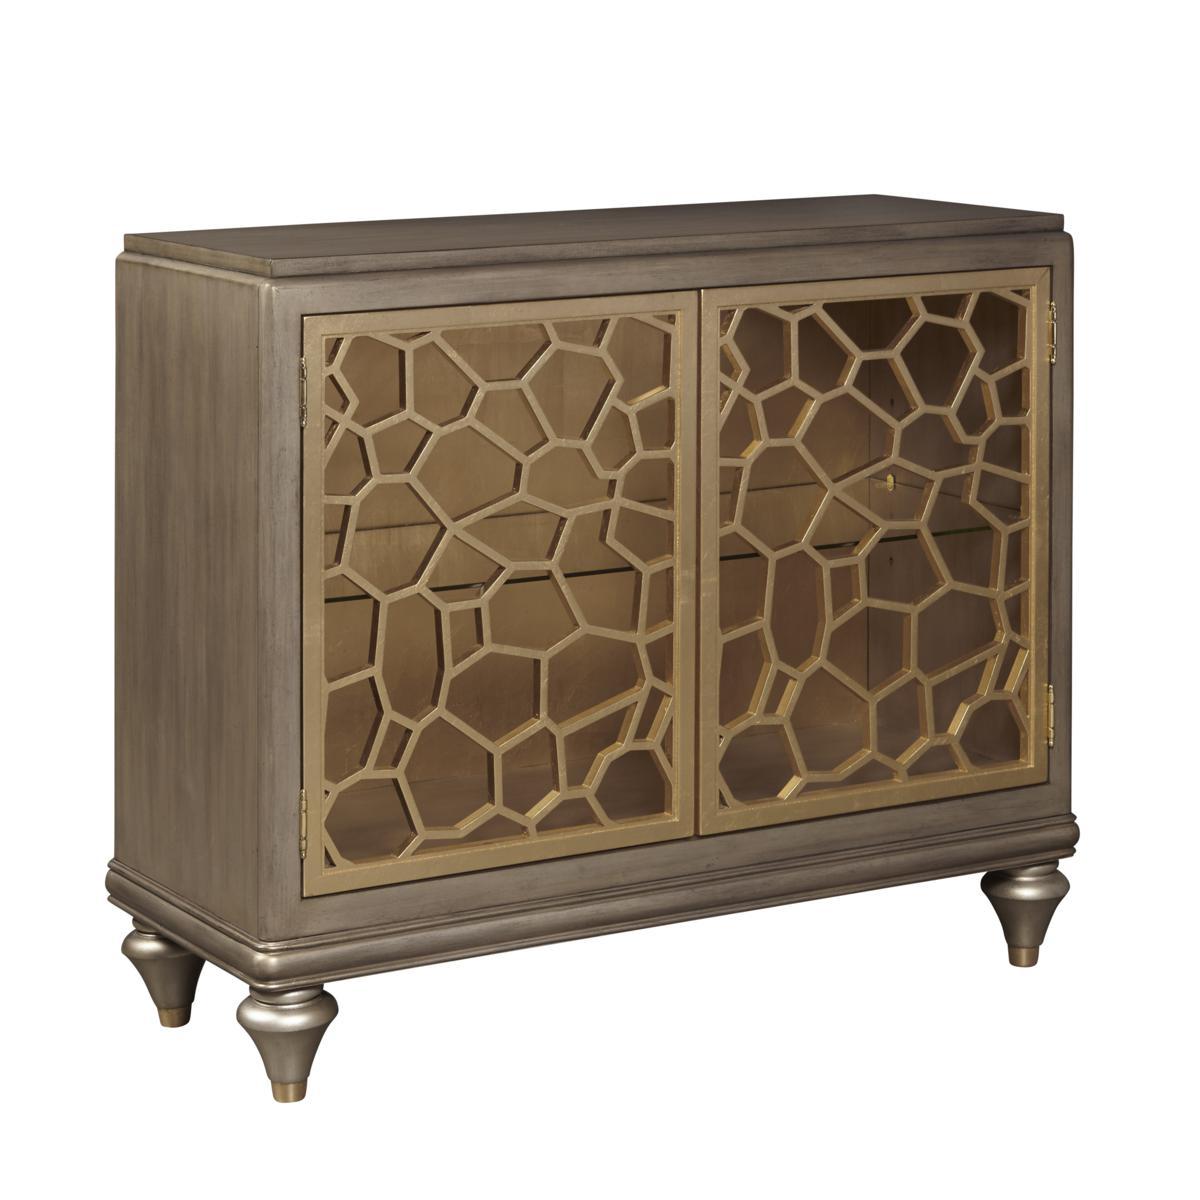 Pulaski Two Door Accent Chest with Pierced Gold Leaf Doors